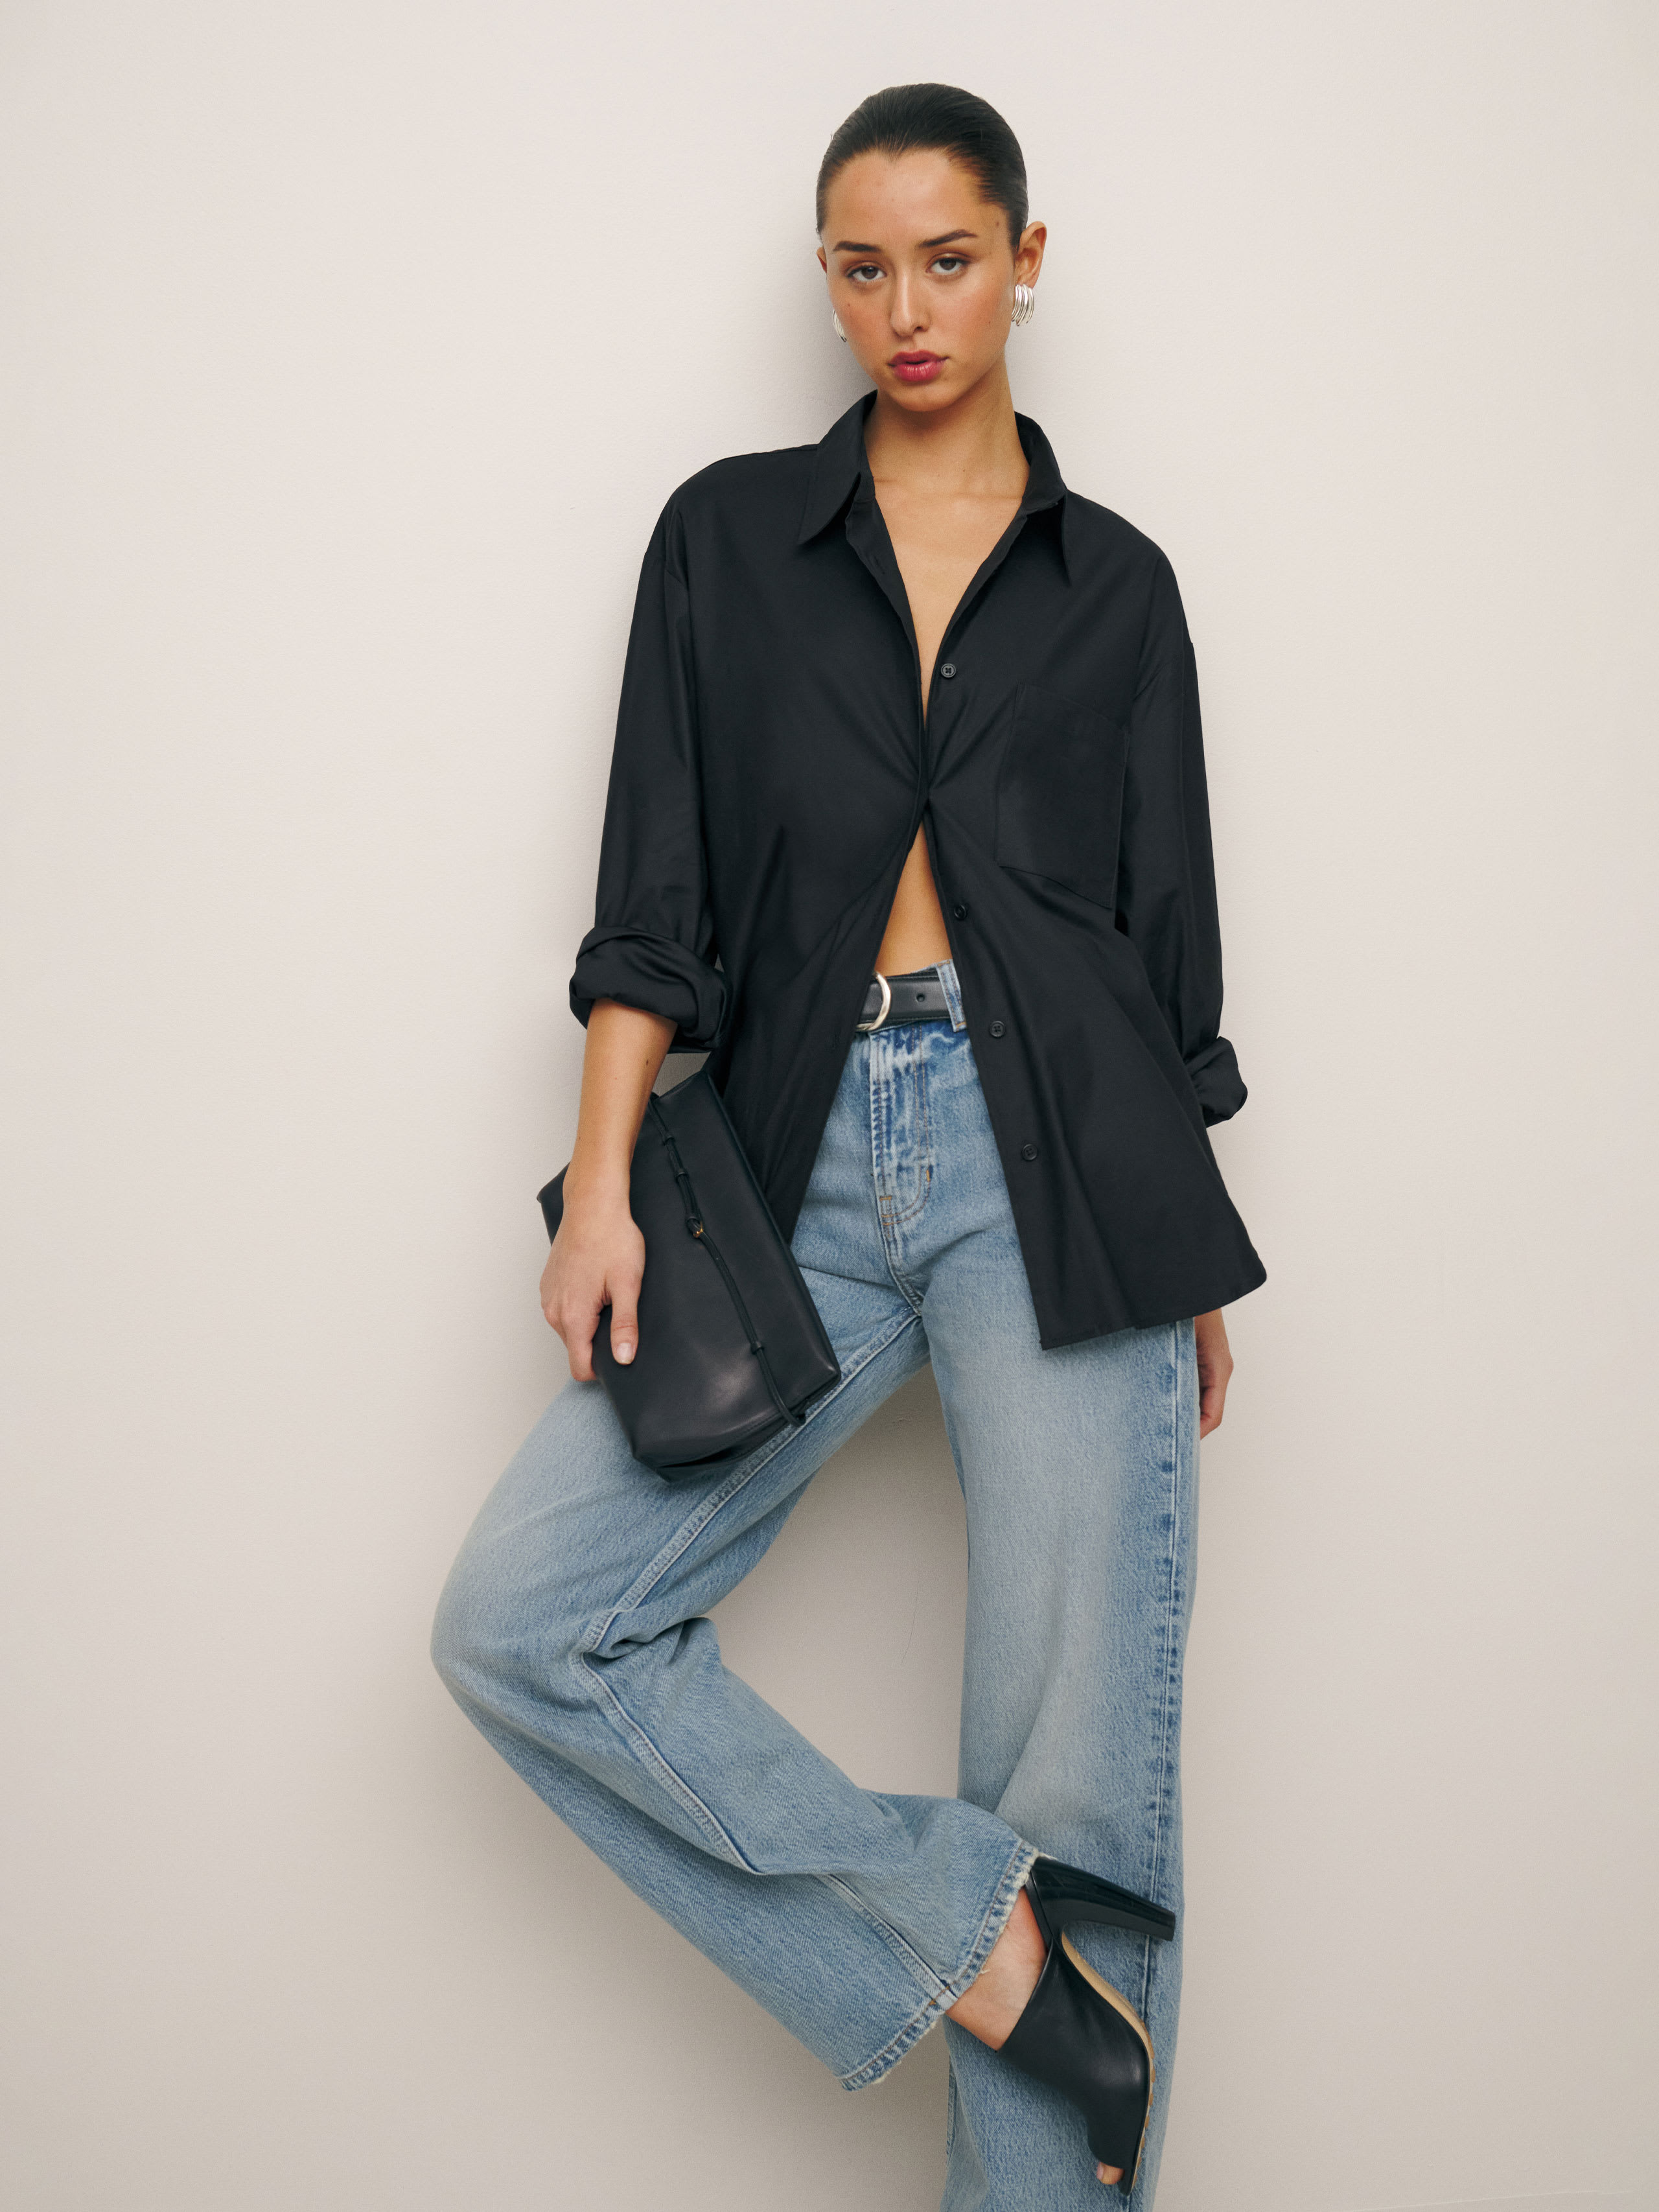 Reformation Will Oversized Shirt In Black